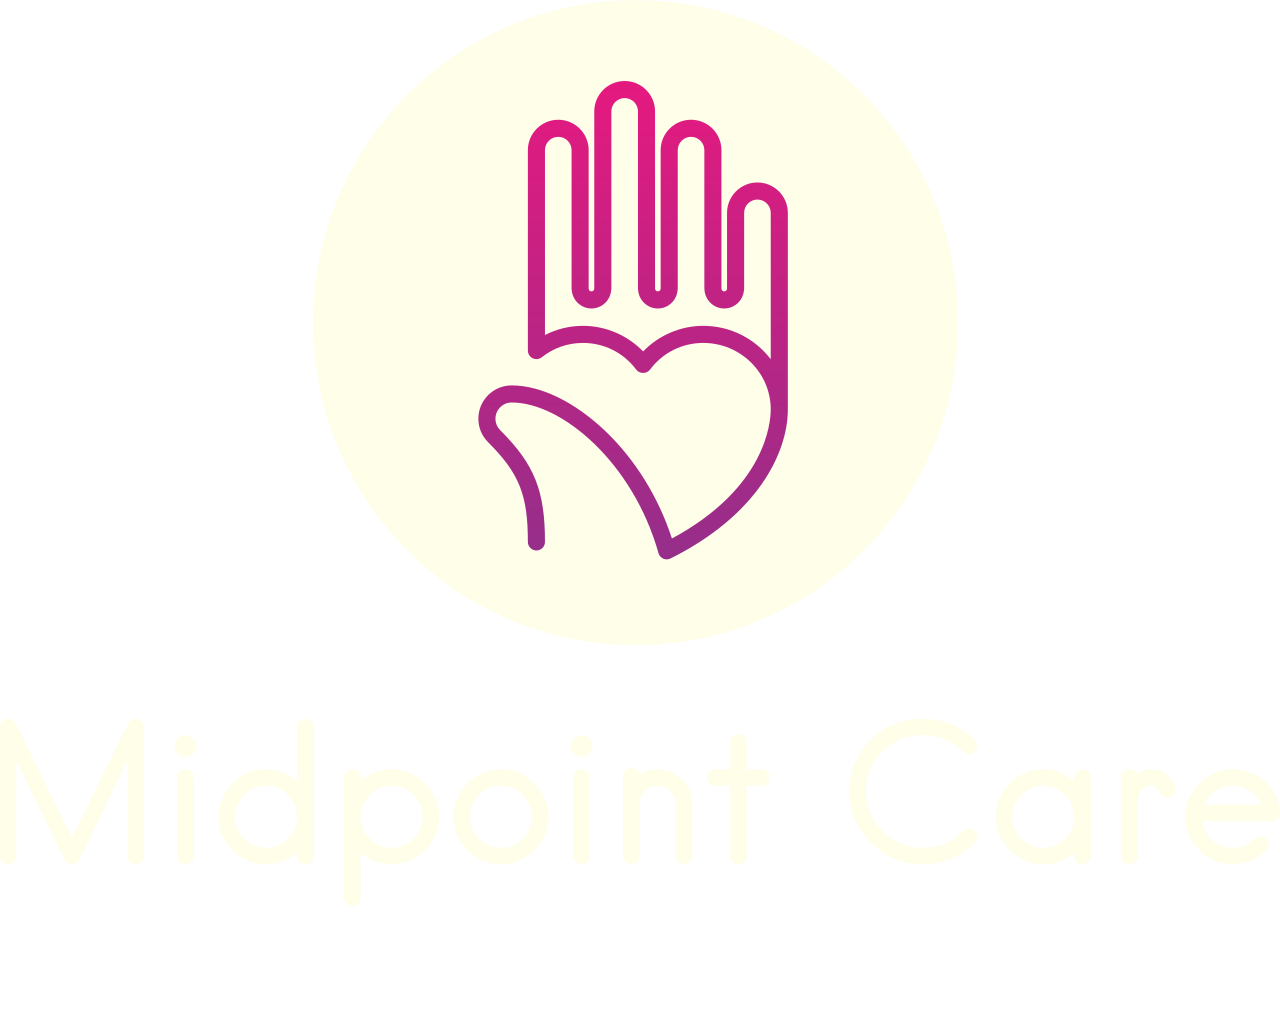 Midpoint Care LLC 's web page